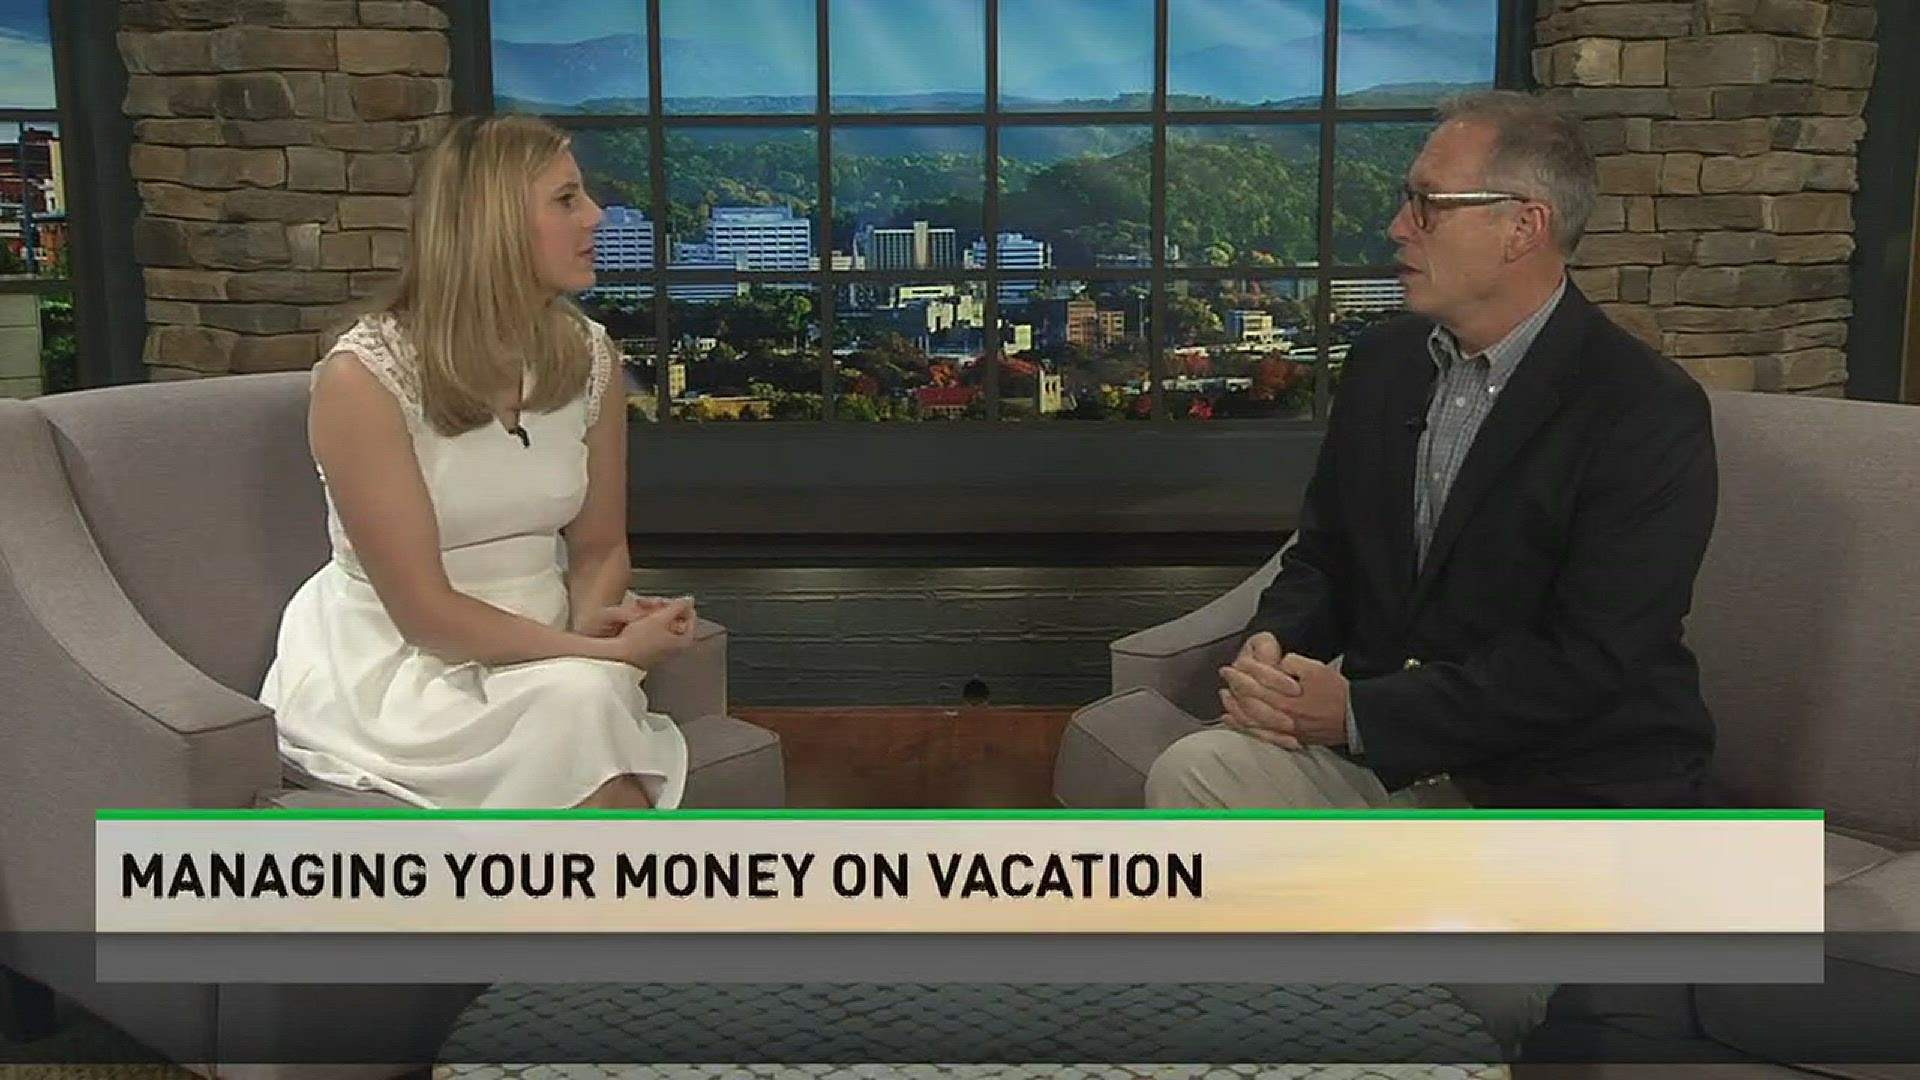 Paul Fain stops by for Sunday Money to talk about managing your vacation money.